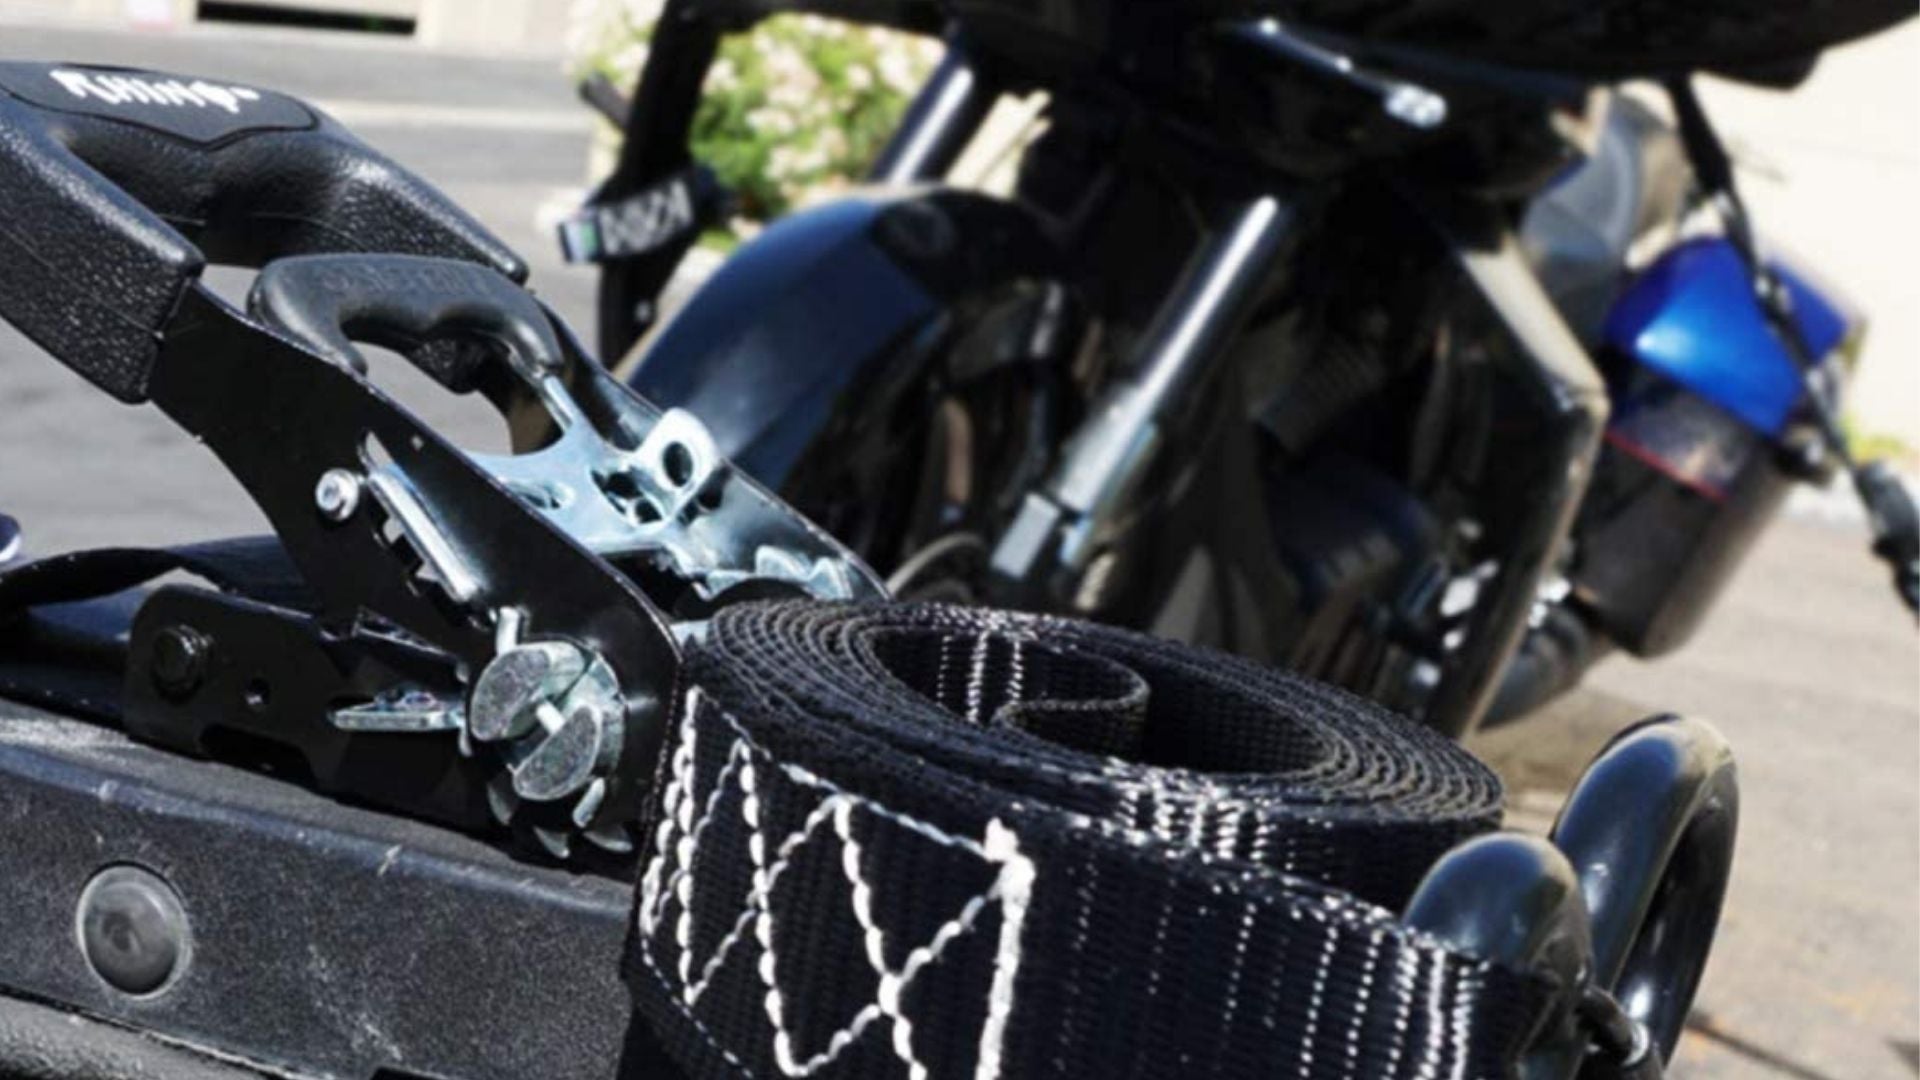 8-Piece 2" Strap Motorcycle Tie-Down Kit for Pick Ups and Trailers 